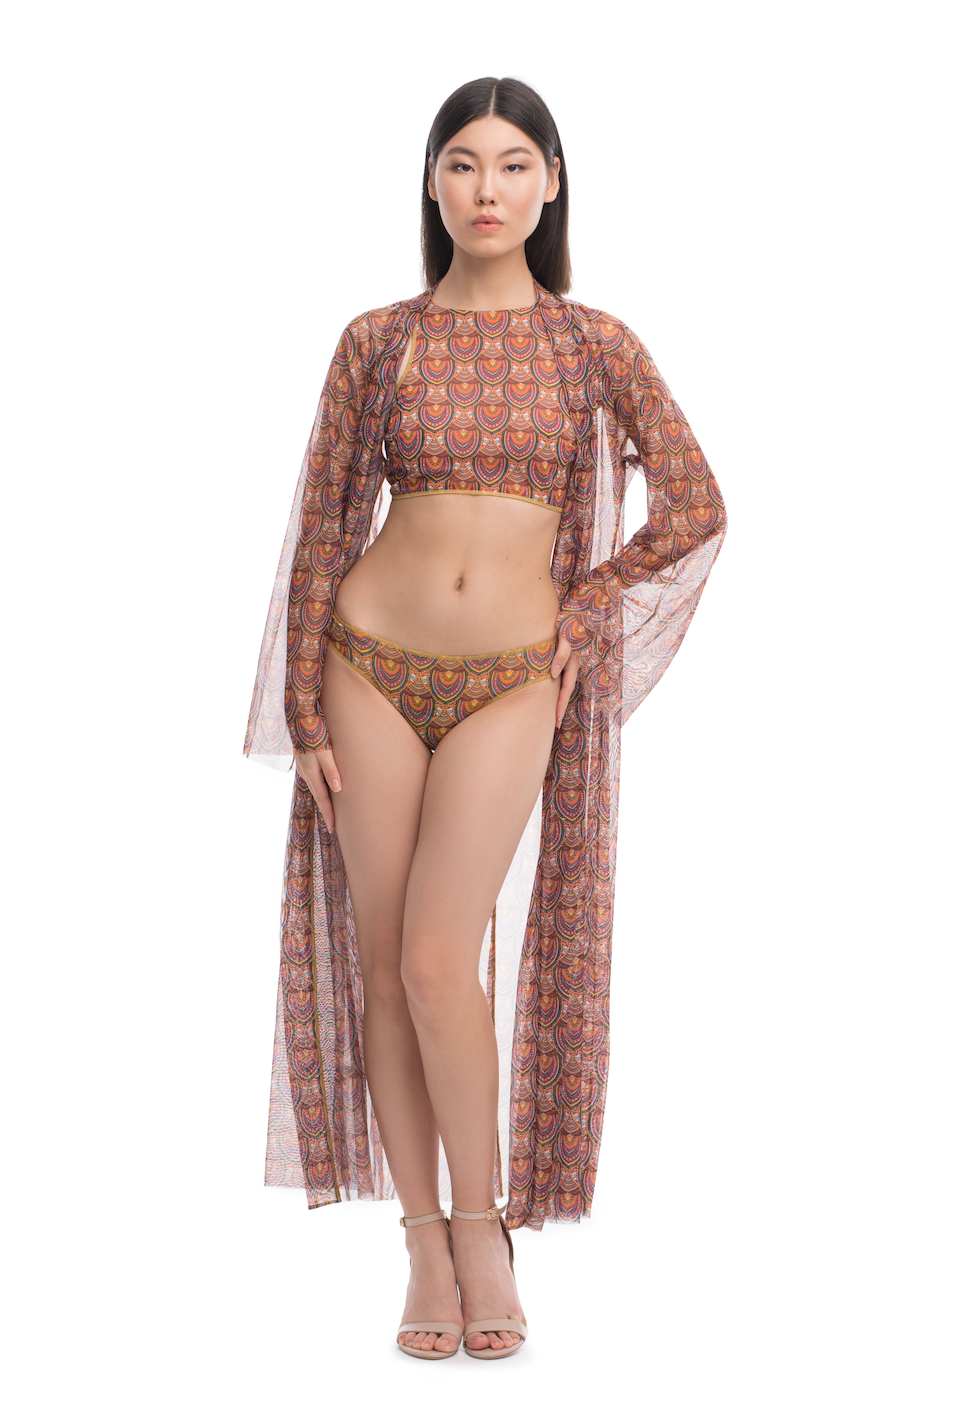 This document provides a concise overview of a sustainable Africa print beach robe, offering SPF 15 protection and tan-without-tan-lines technology. Ideal for individuals with visual impairments or low-bandwidth connections seeking stylish, sun-safe beachwear options